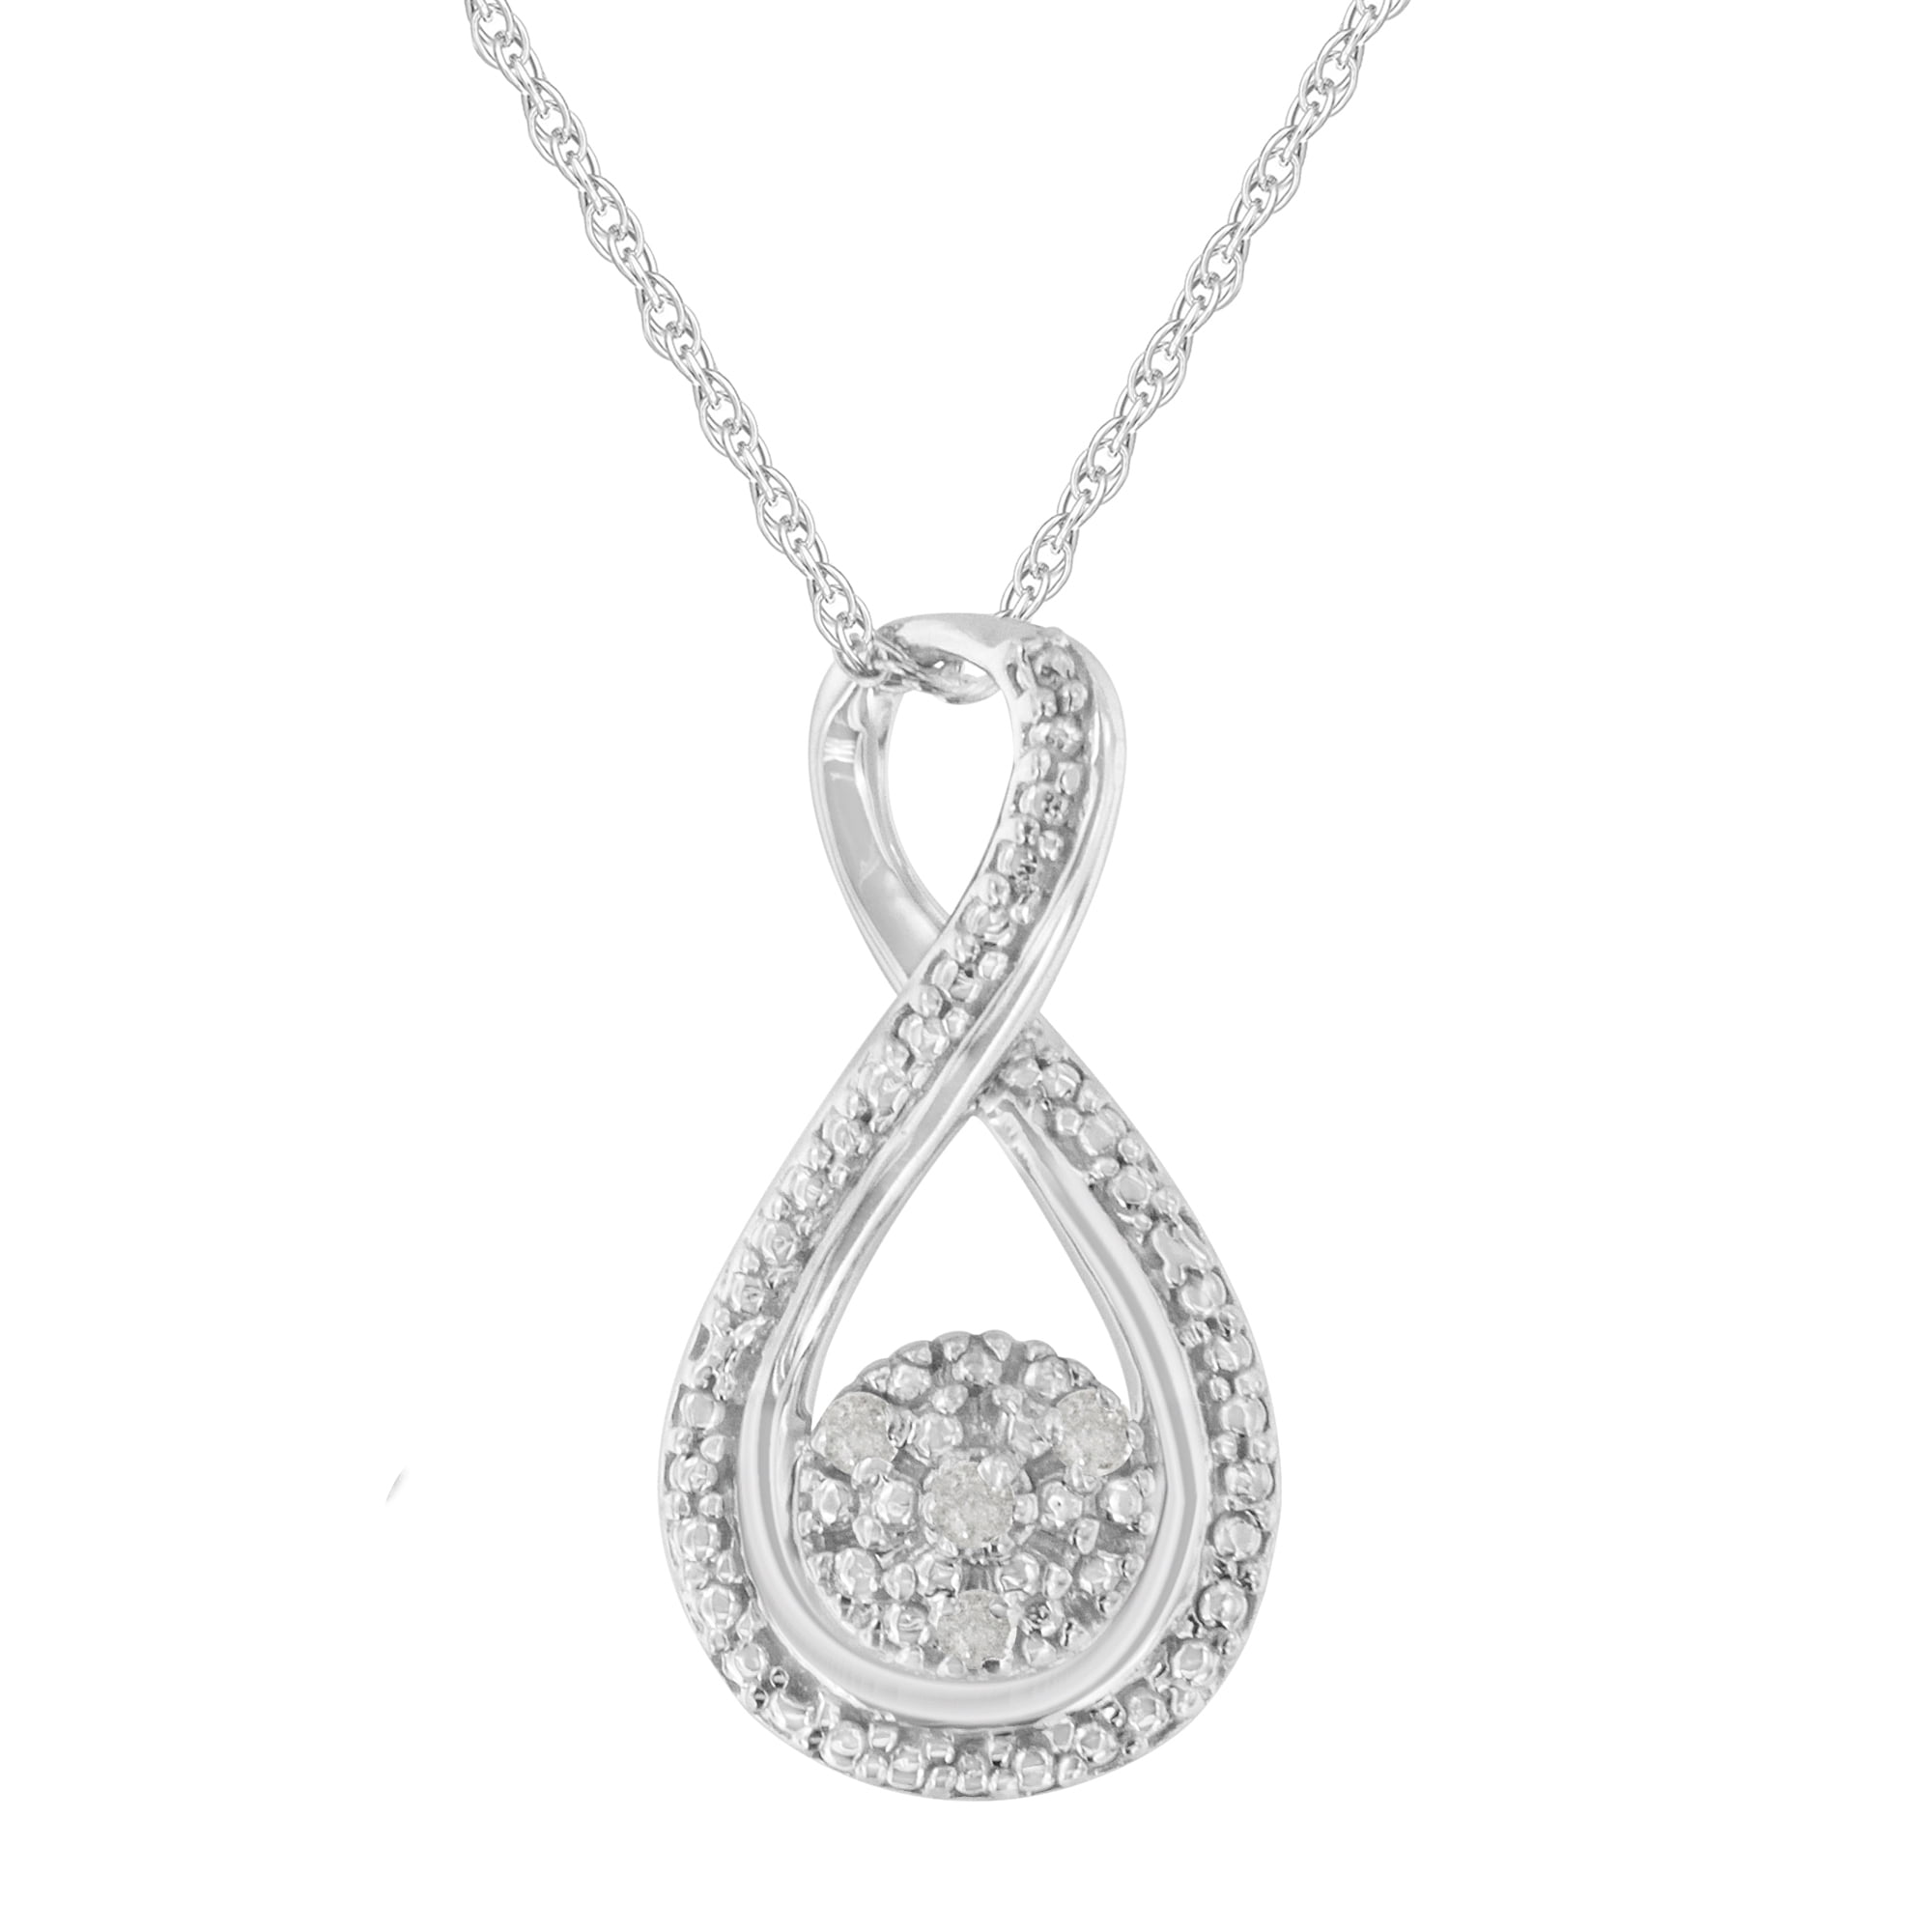 Details about   REAL 925 Sterling Silver Double Broken Hearts Pendant SIMULATED DIAMONDS 